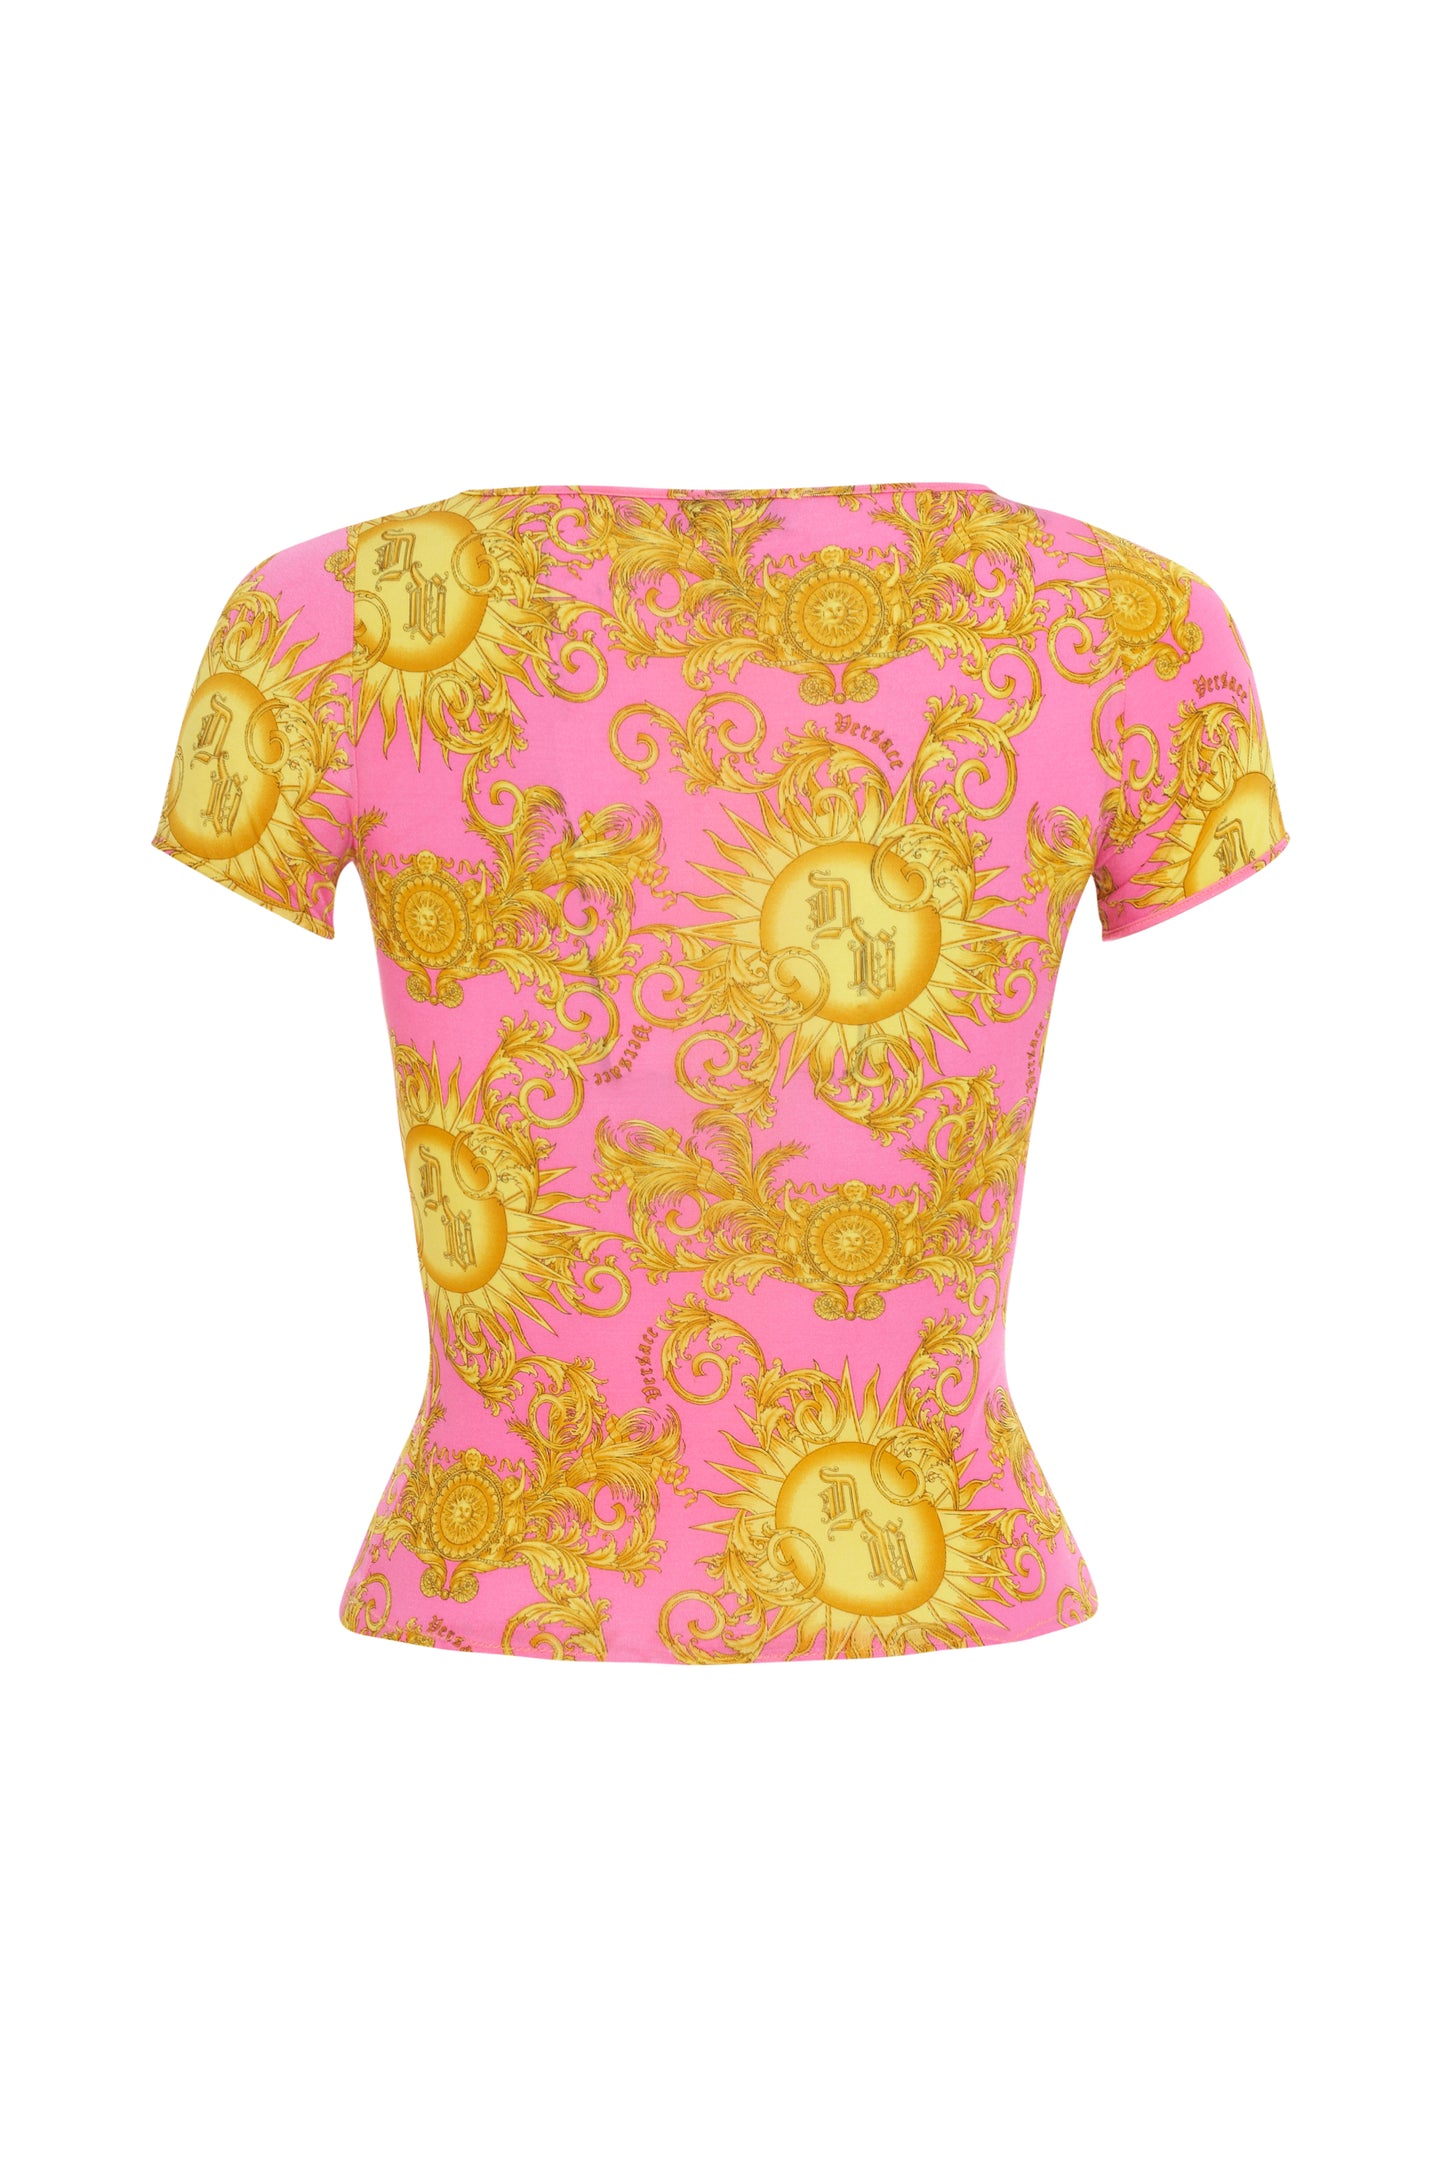 Versace pink and gold baroque print t-shirt